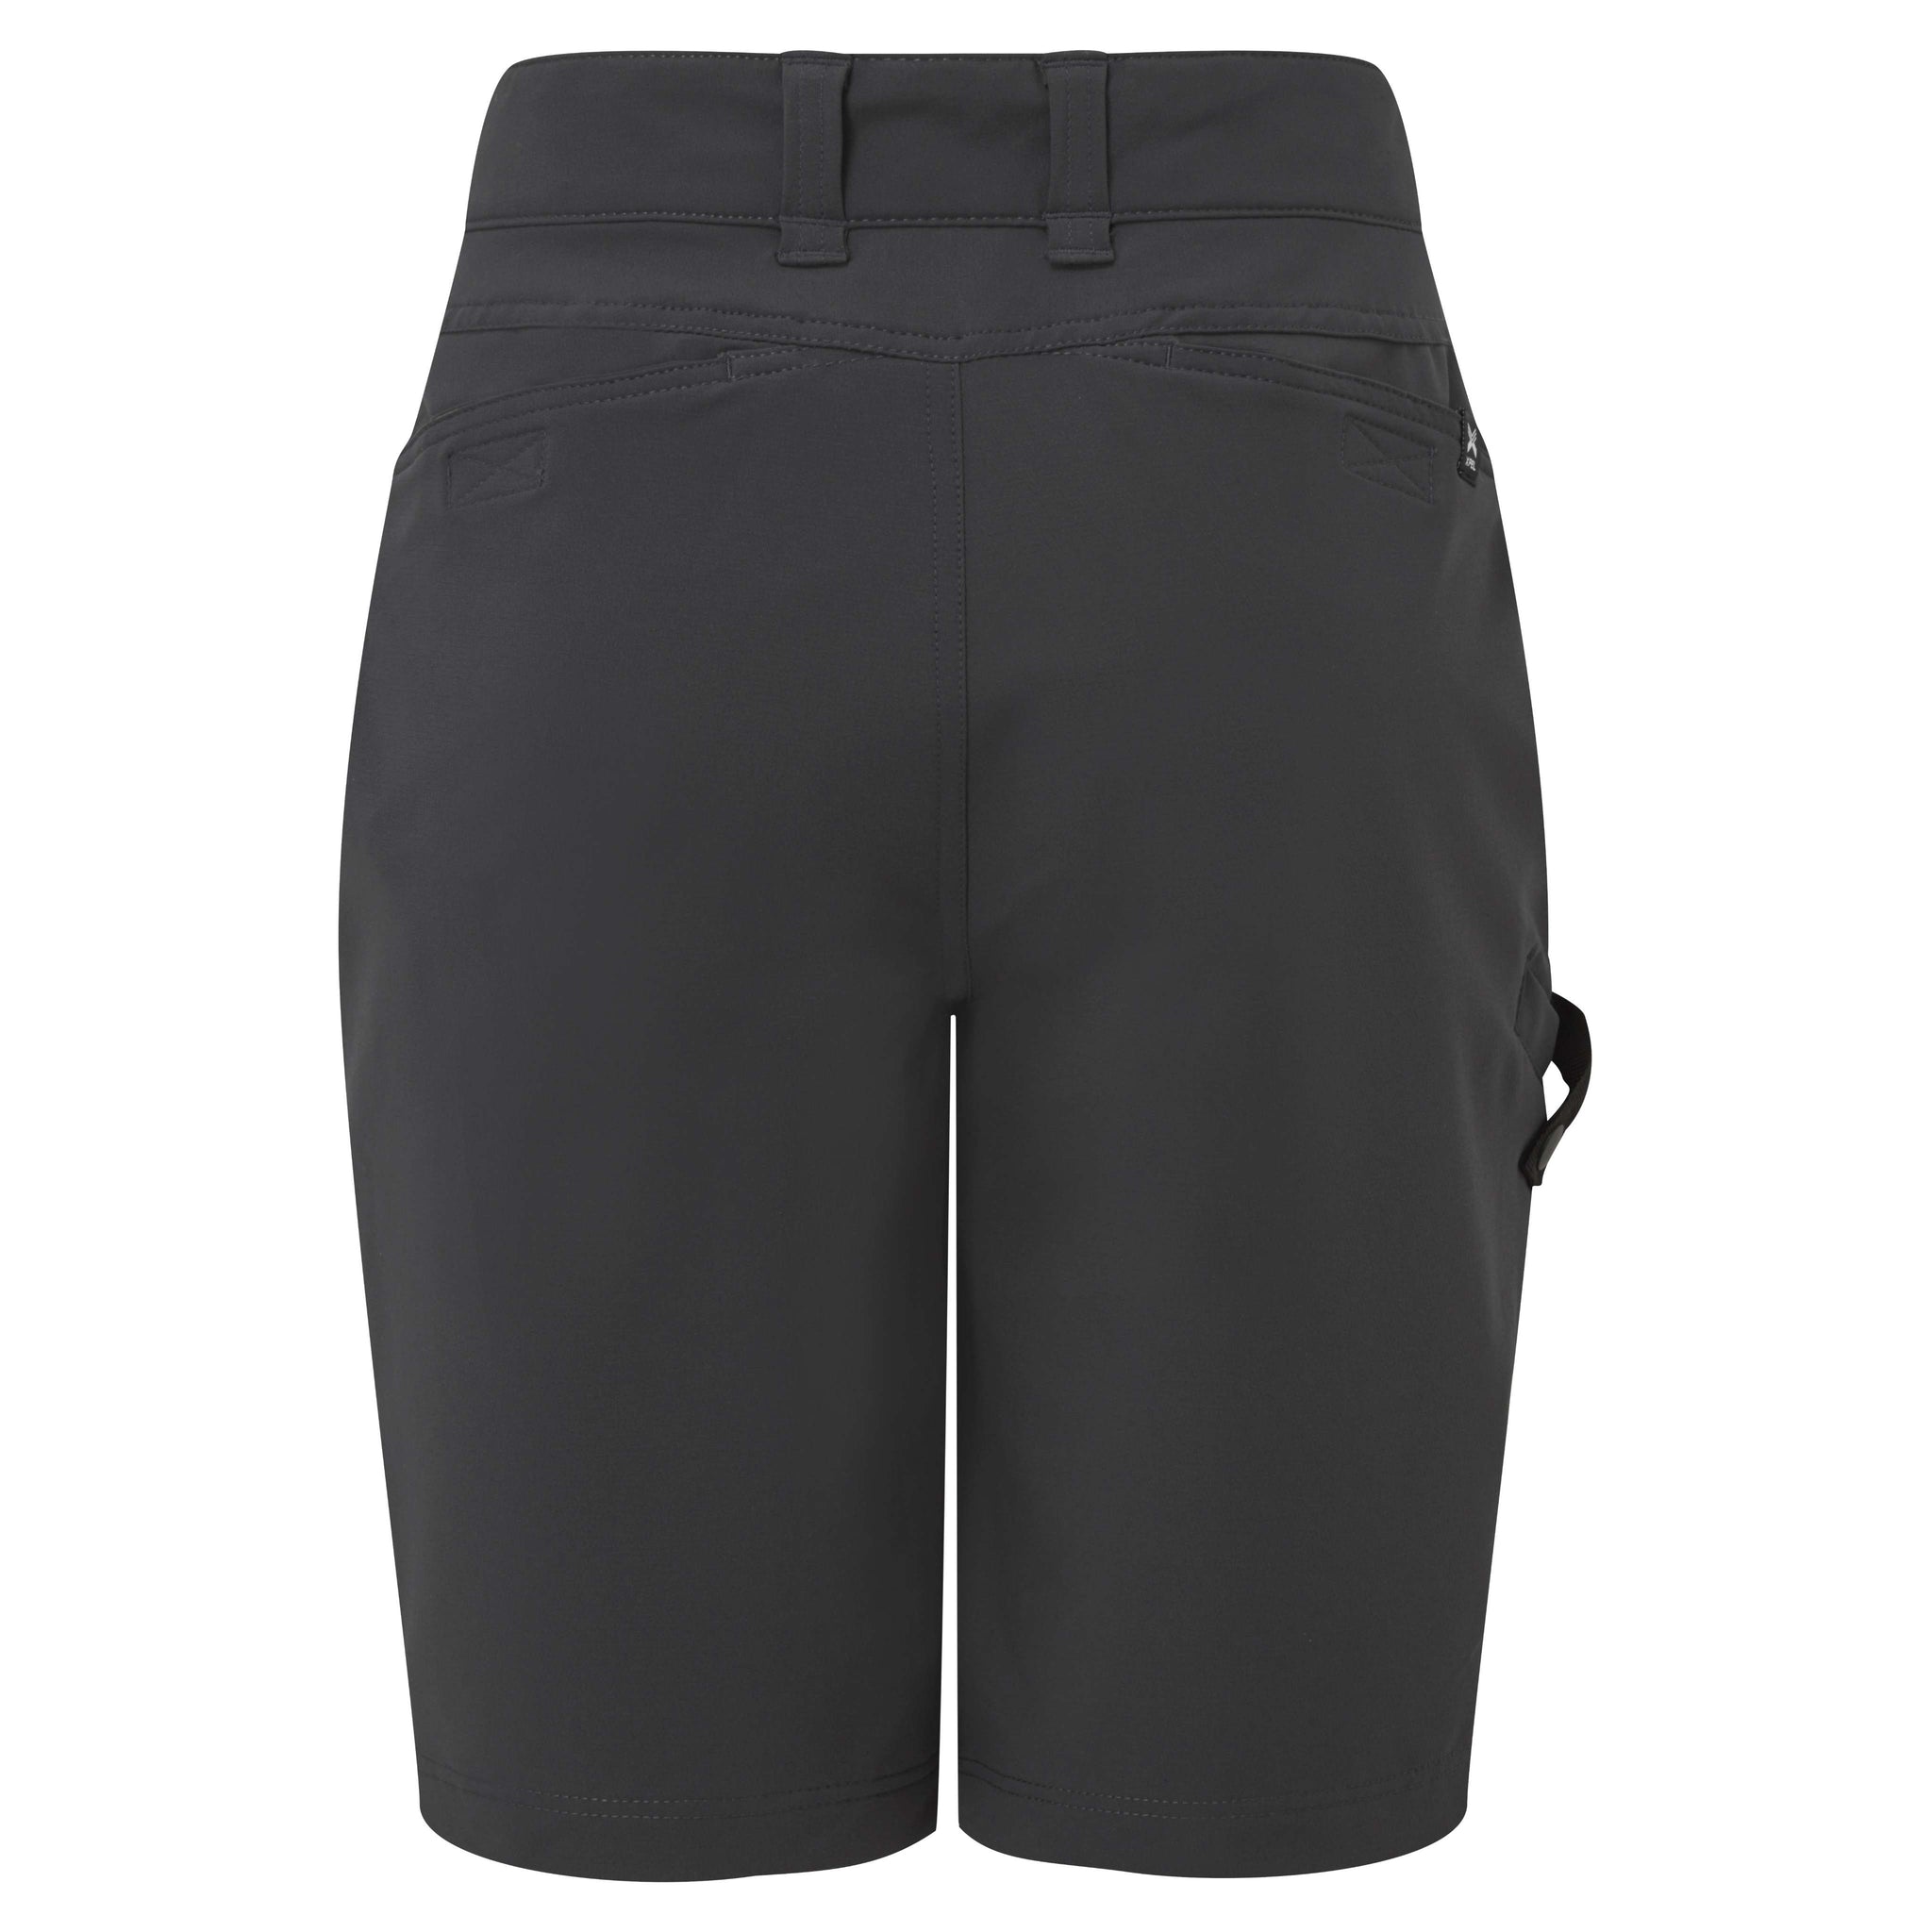 Gill - Women's Pro Expedition Shorts